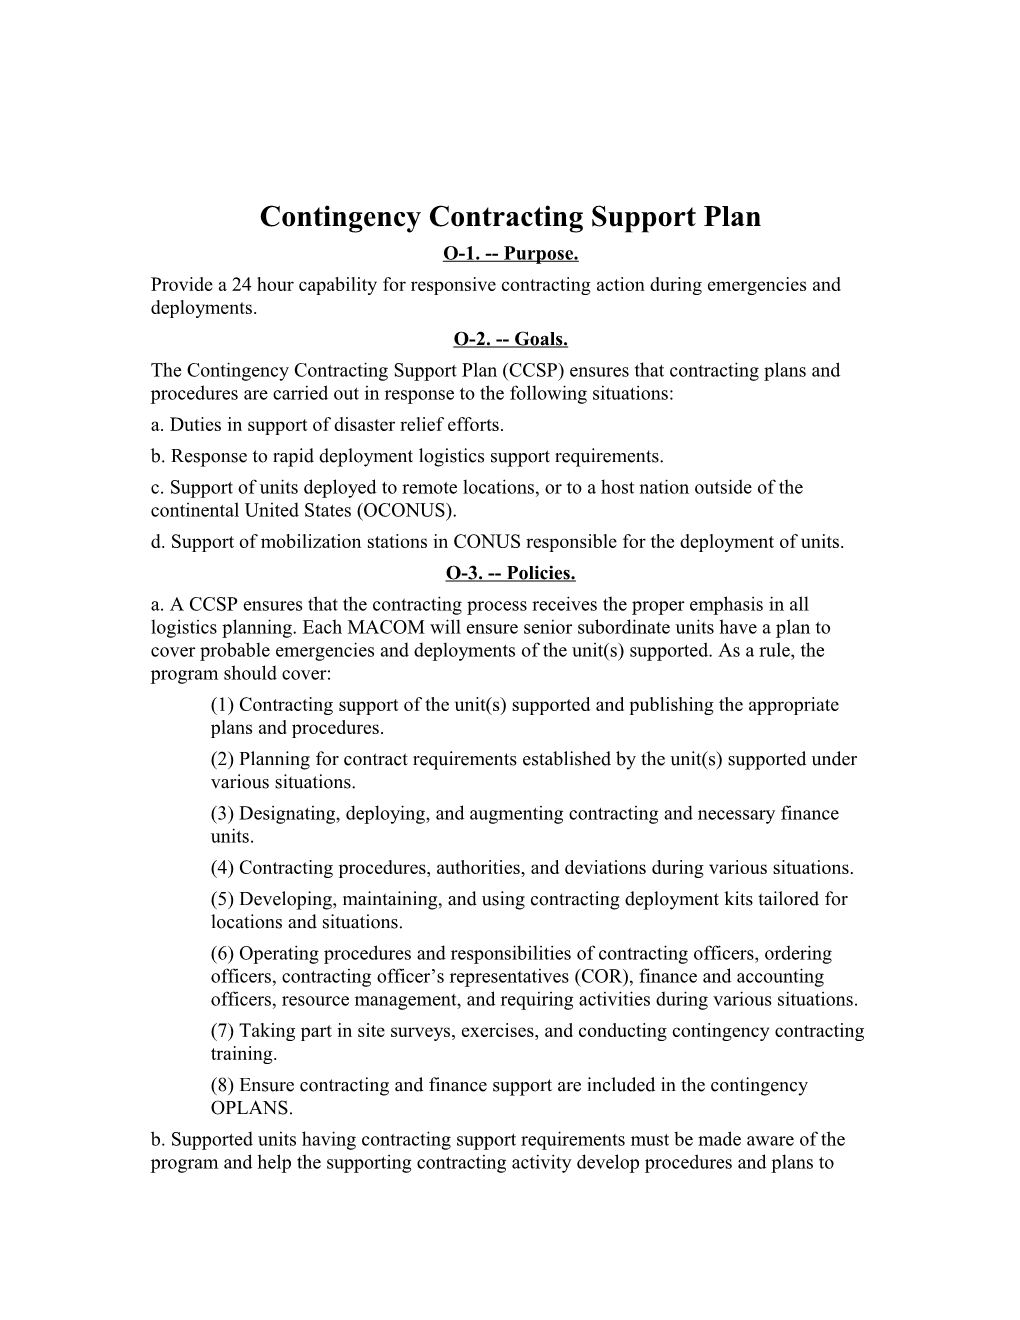 Contingency Contracting Support Plan